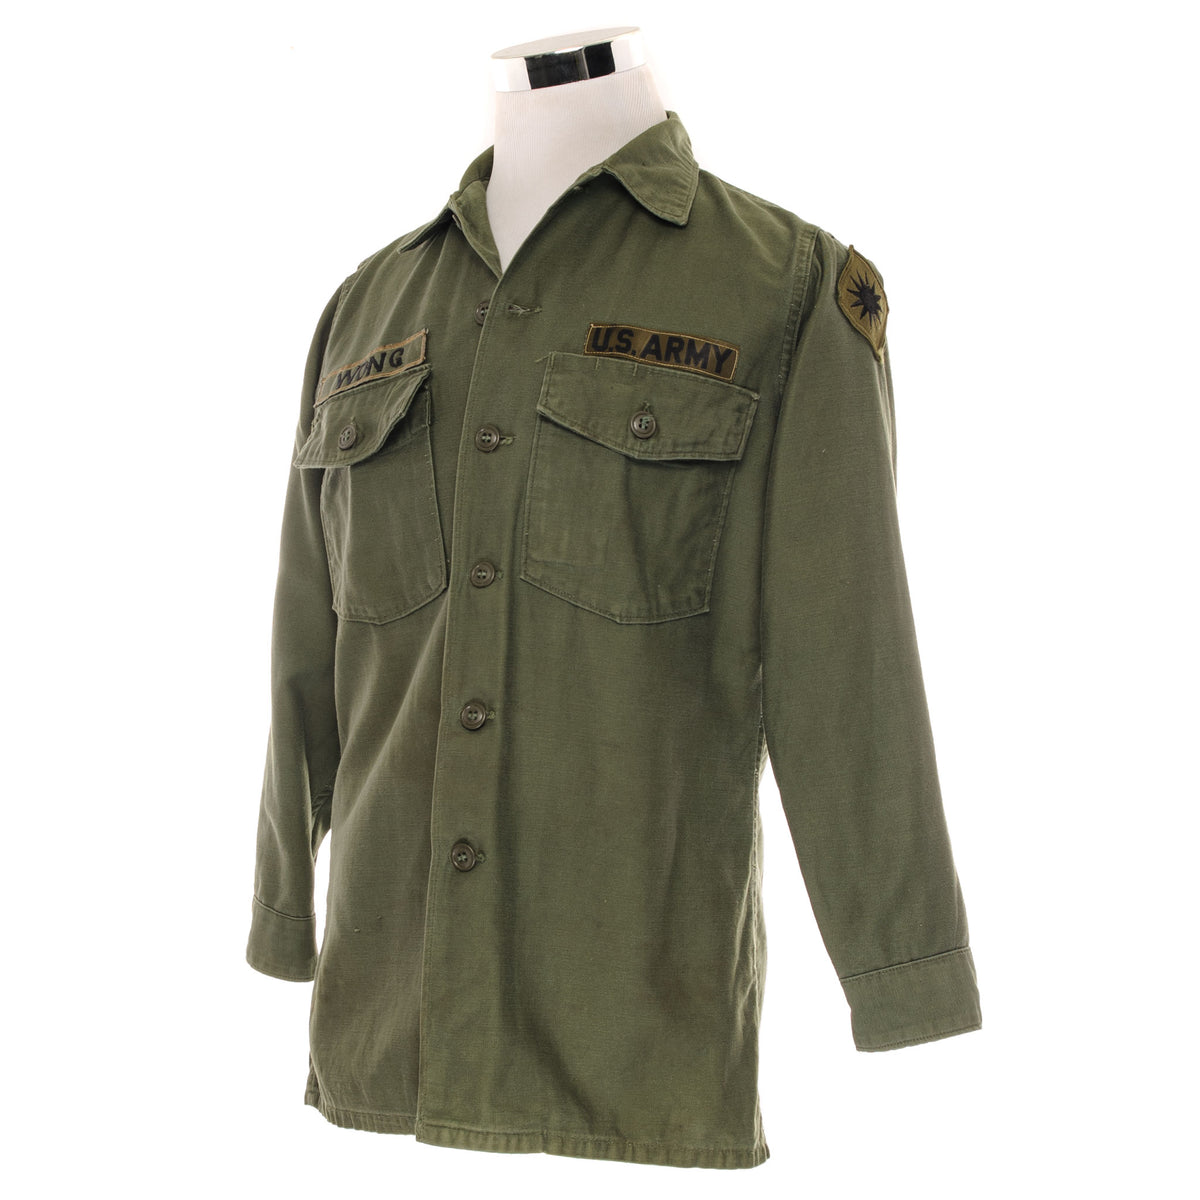 Vietnam War - U.S. P64 Utility Shirt with Leather Medic Patch - M1